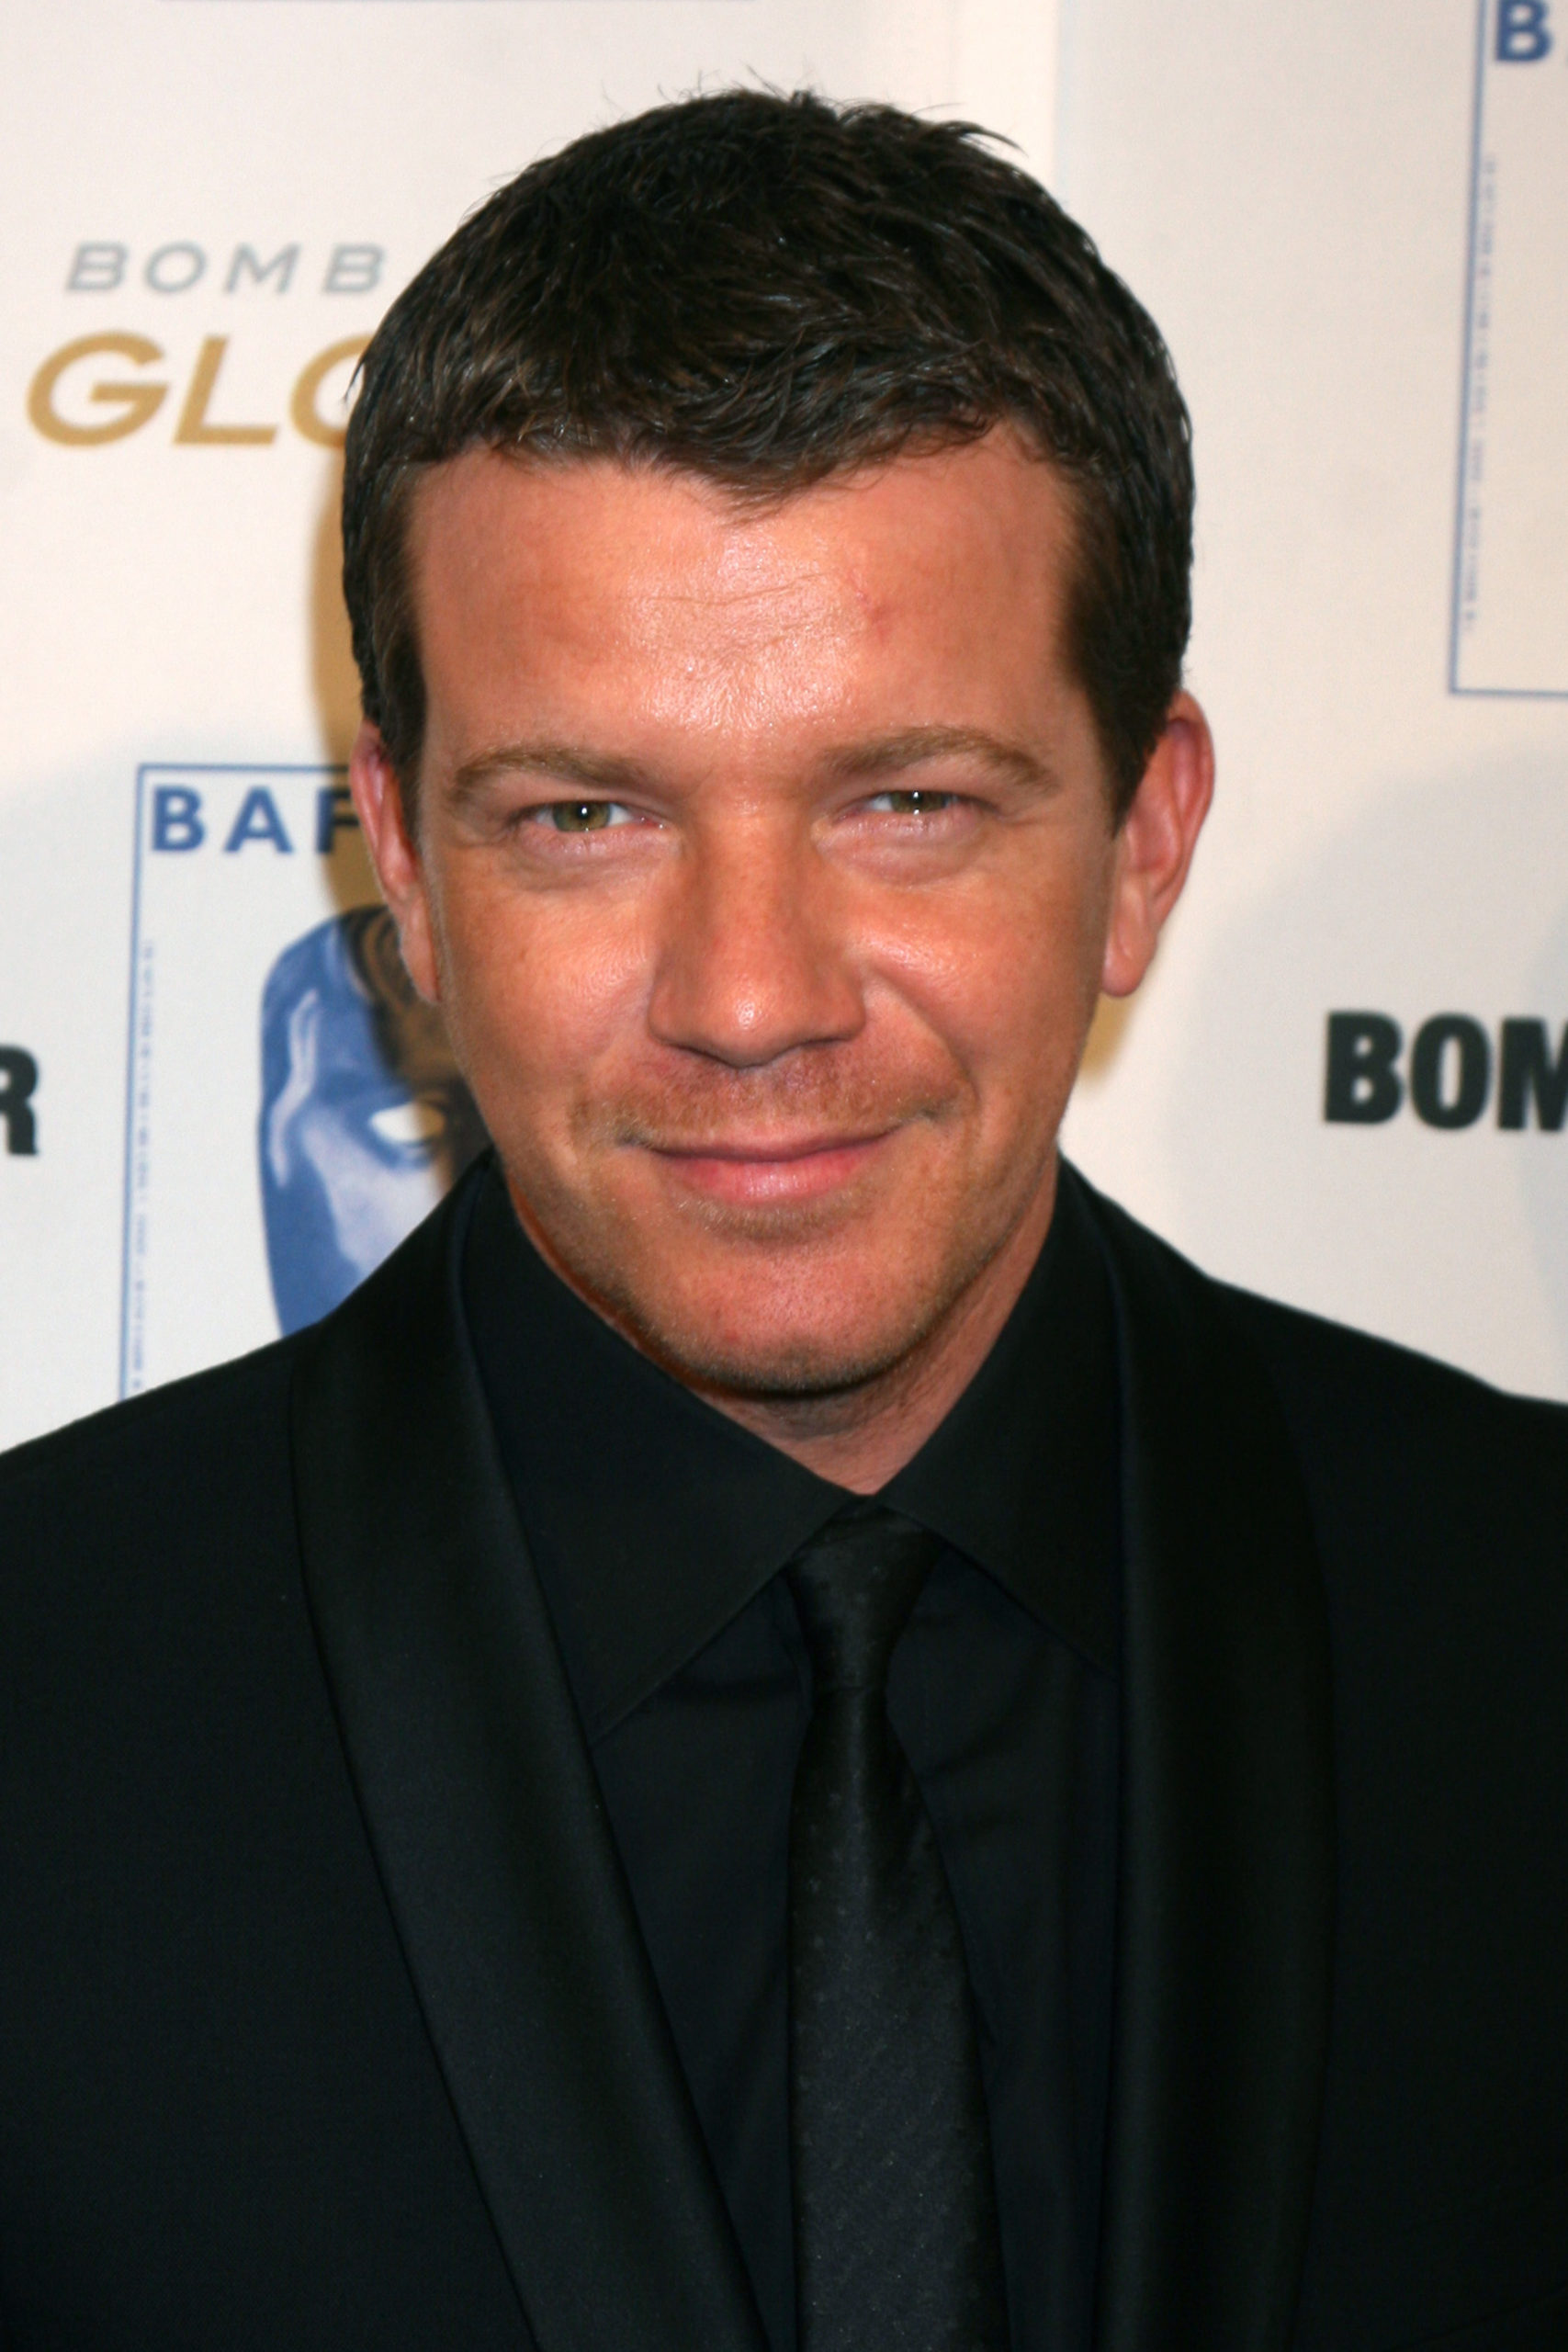 #The Gentlemen: Max Beesley Joins Netflix Drama Series from Guy Richie